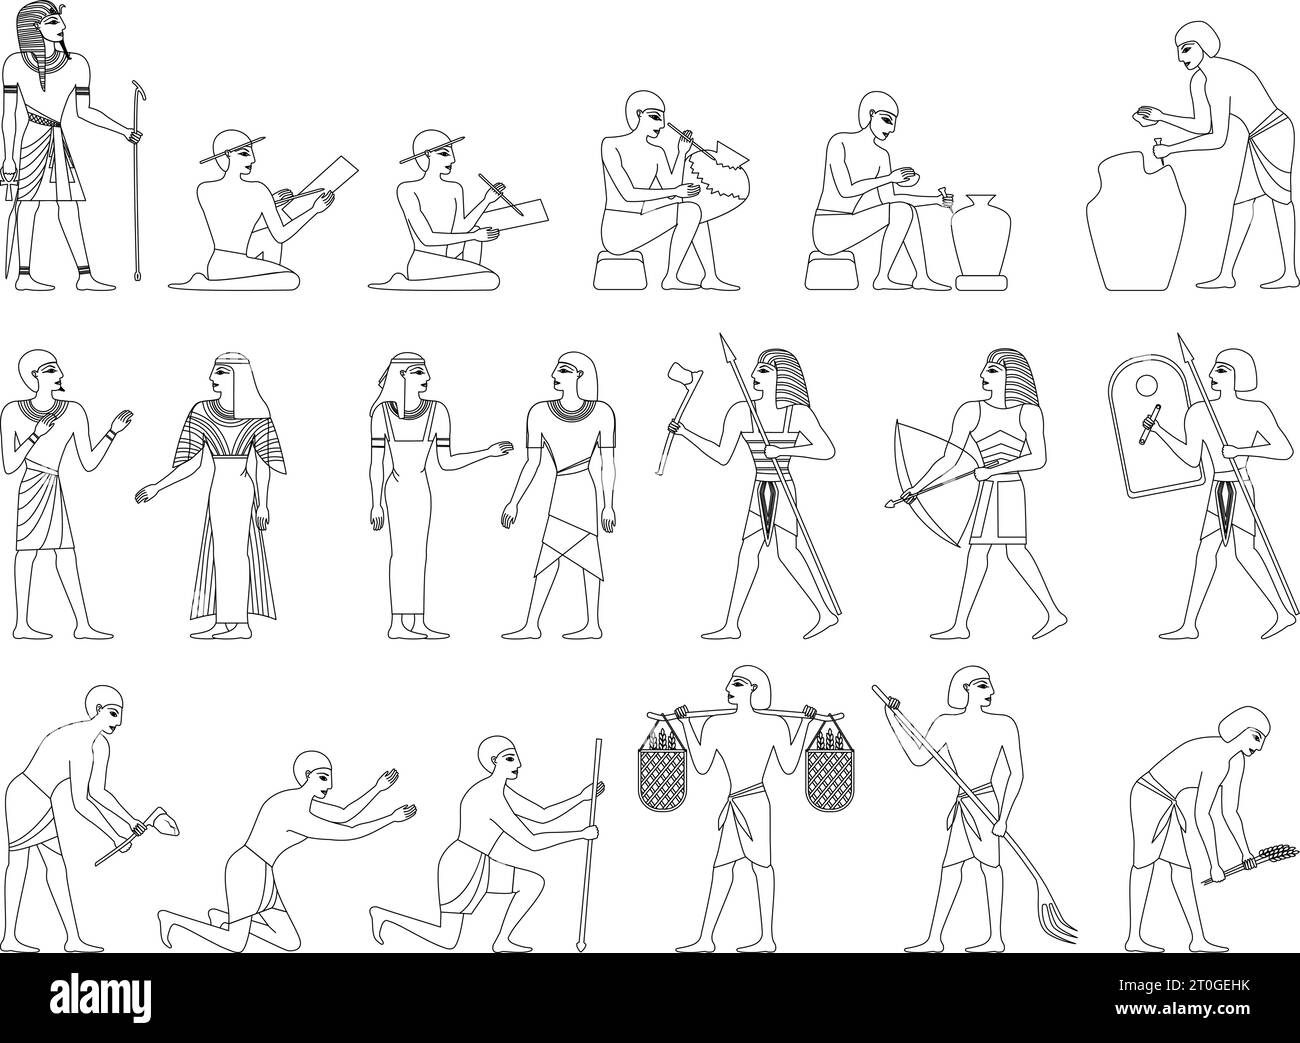 Ancient egypt society monochrome set with isolated icons wireframe human characters of egyptians on blank background vector illustration Stock Vector